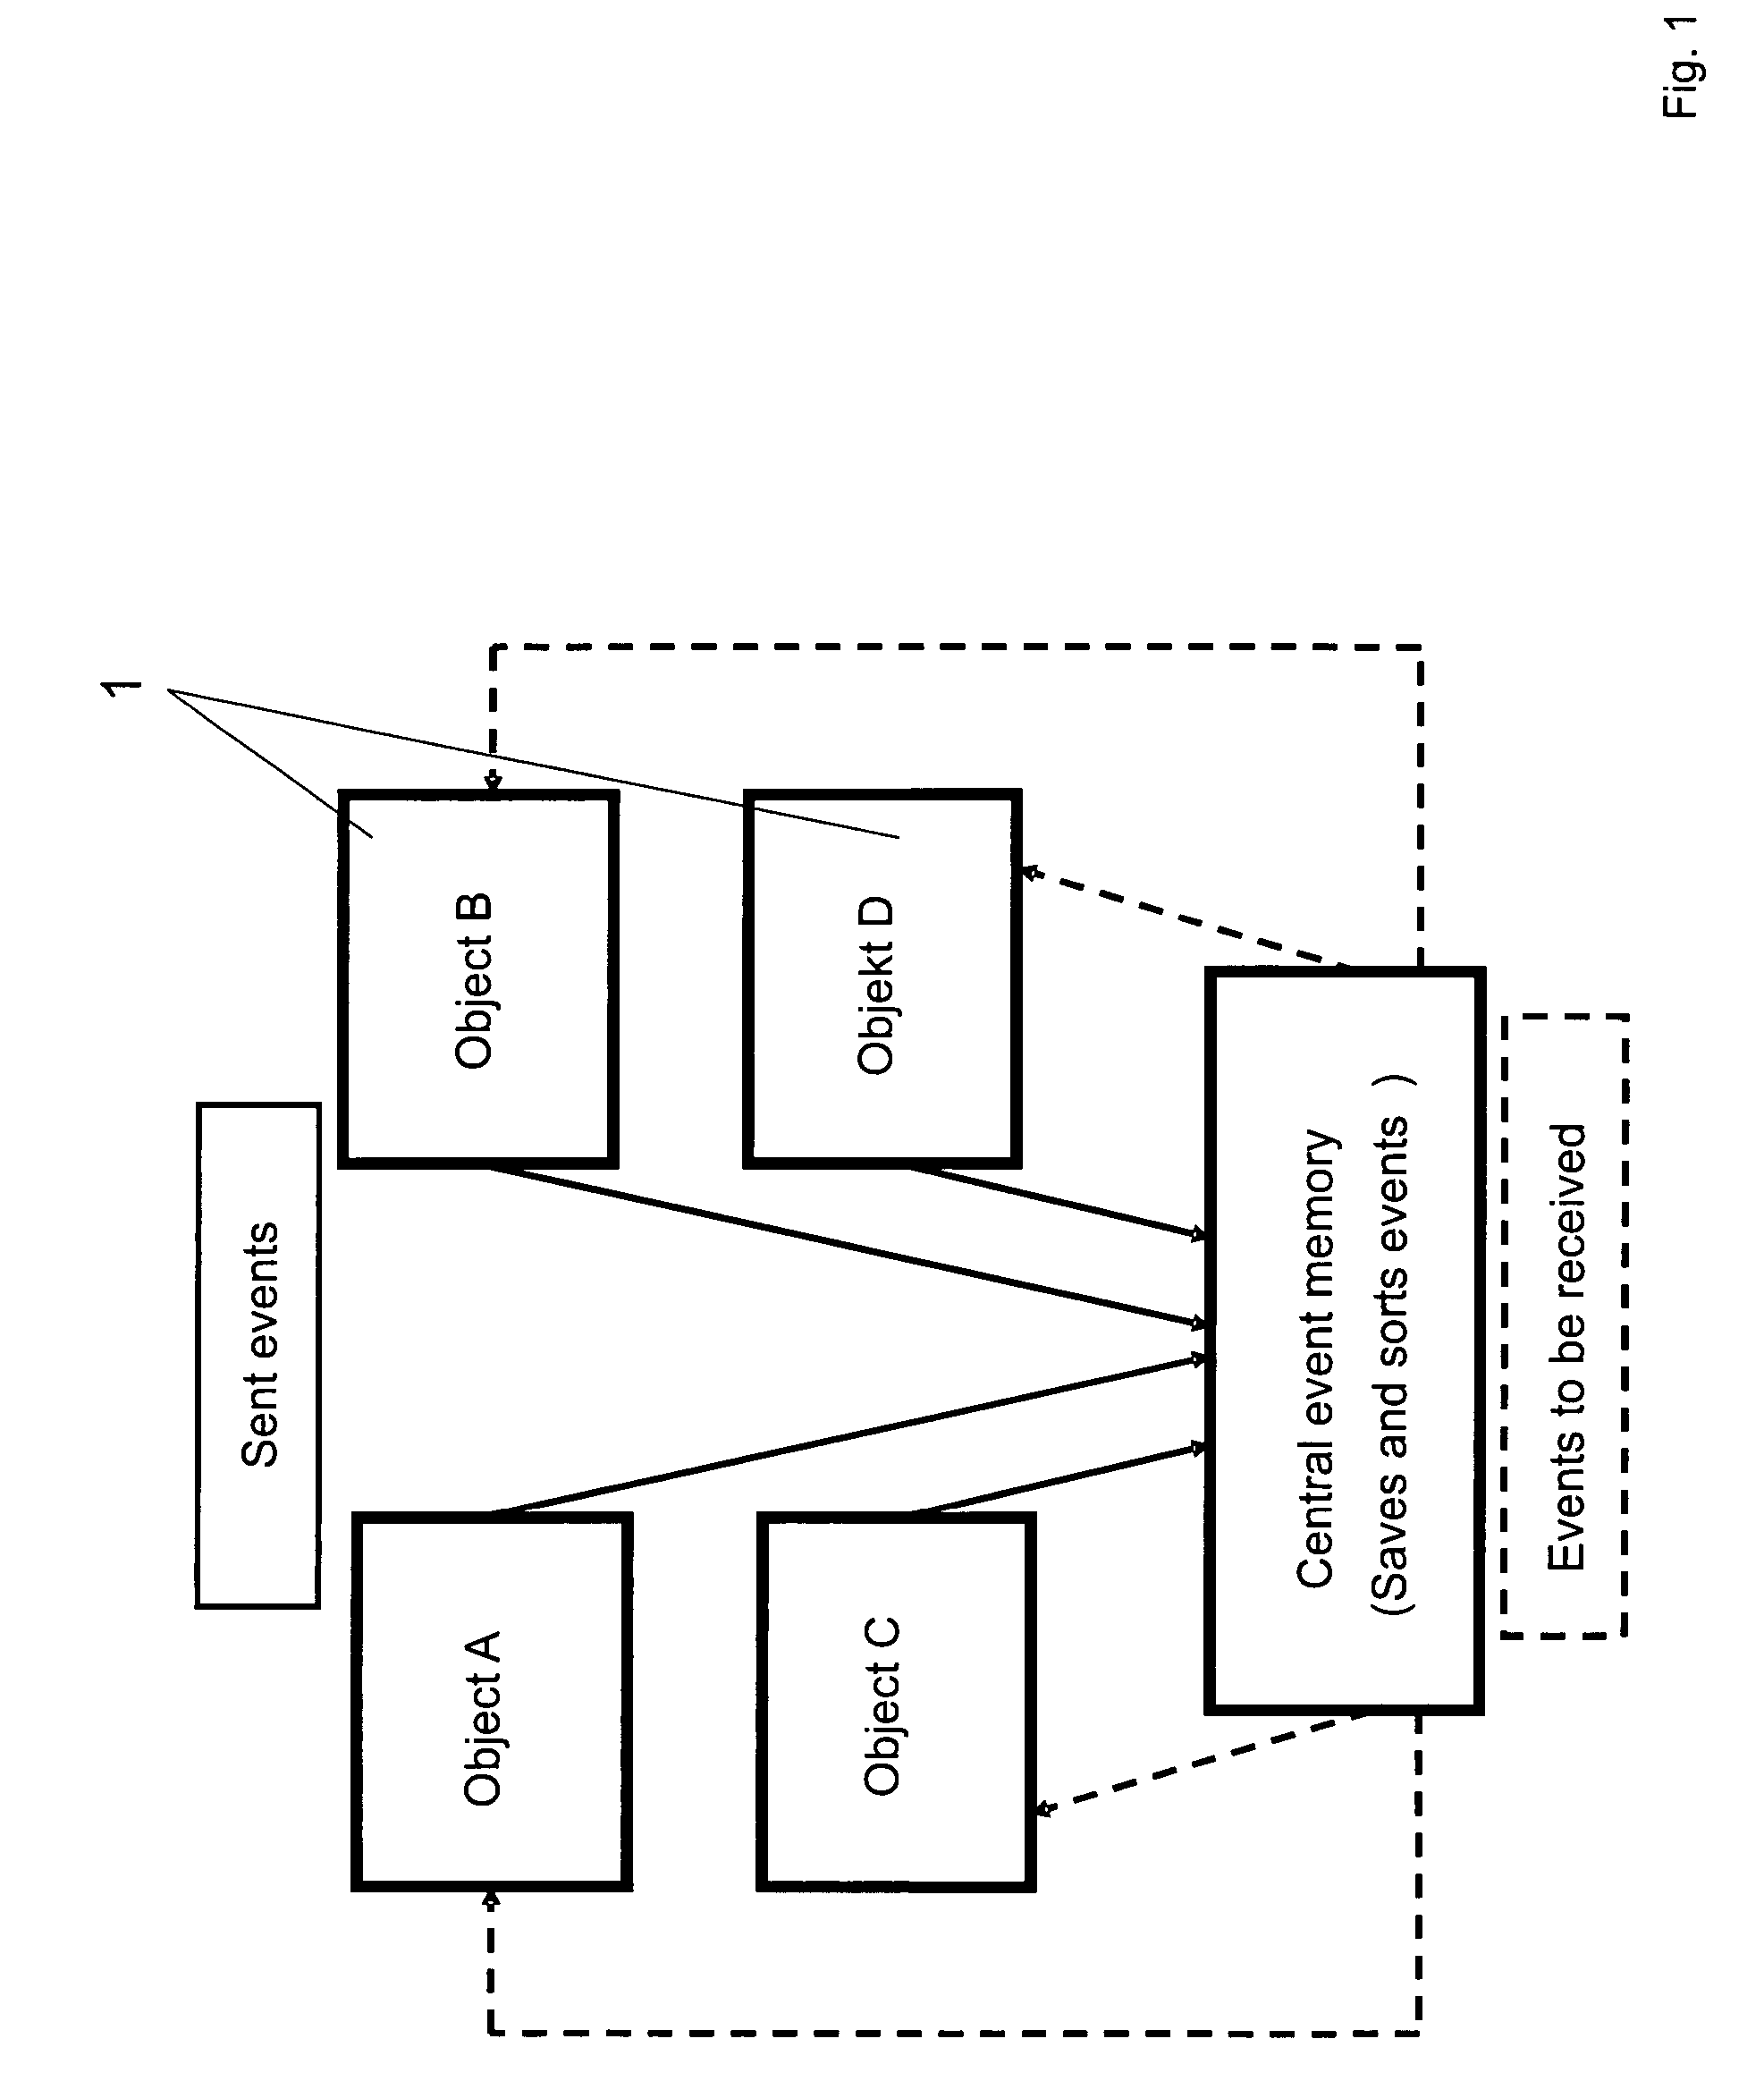 Method for controlling sequential object-oriented system-simulations